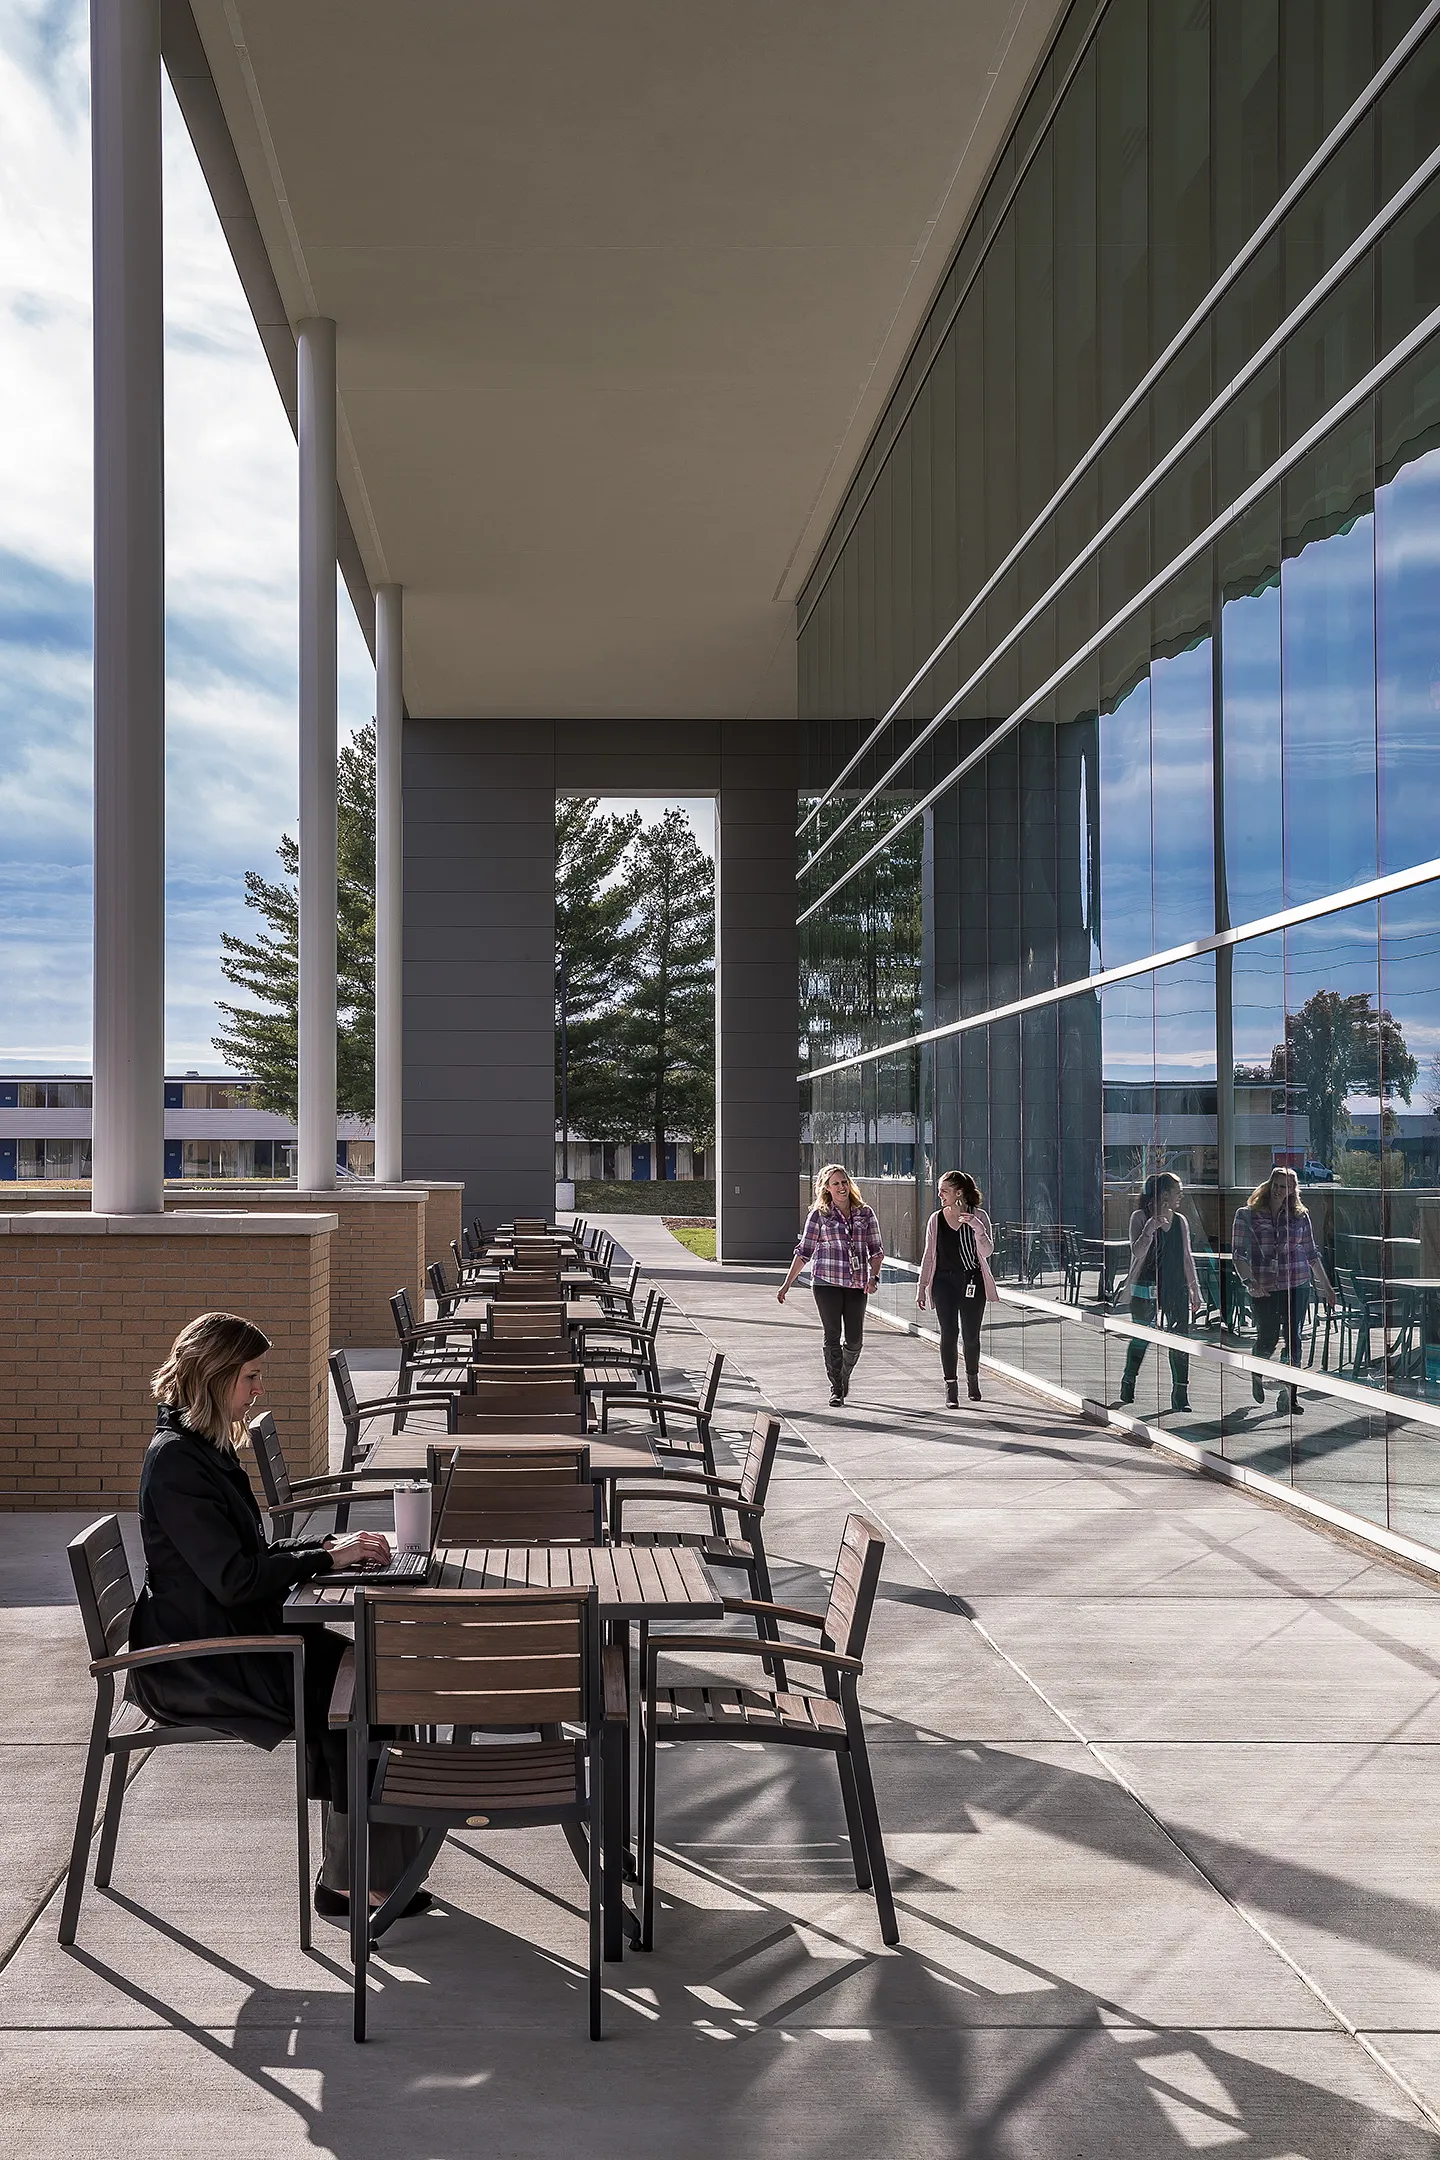 The building’s two-story glass façade and exterior workspace connect staff to nature and sheltered seating areas.  An outdoor screen under the canopy provides a presentation opportunity for all company gatherings.